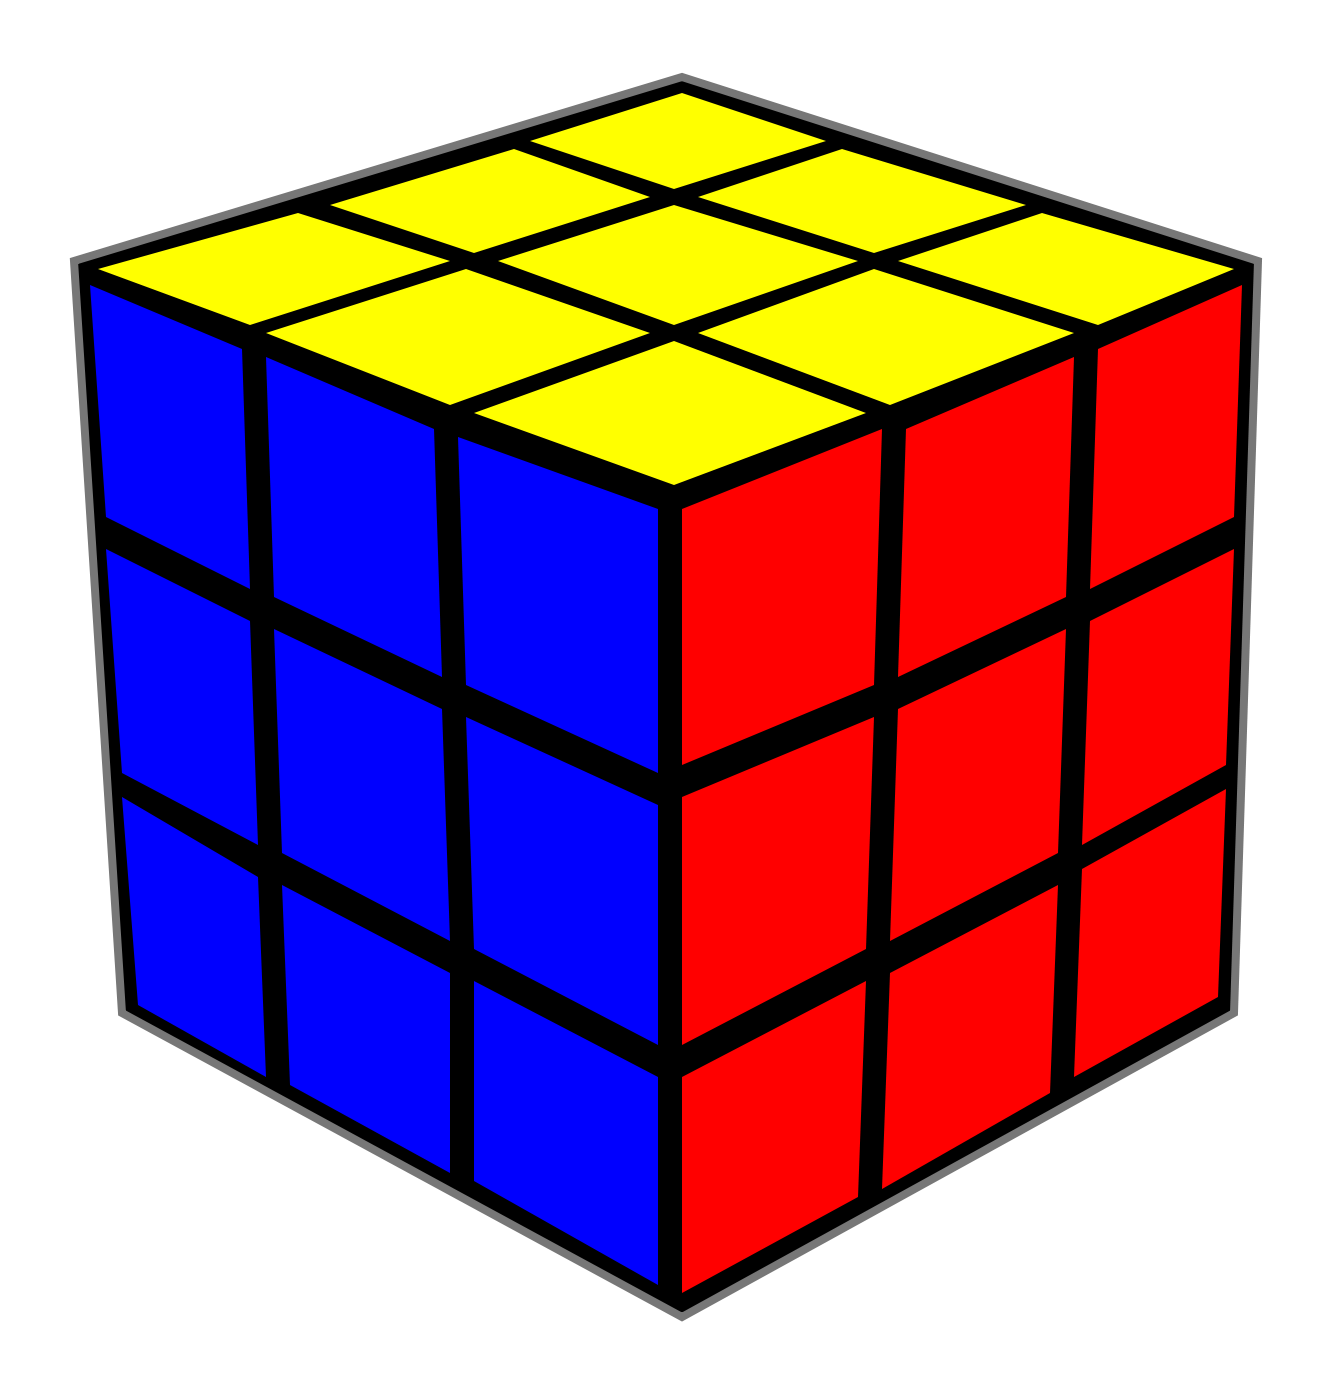 Rubiks Cube PNG Image in Transparent